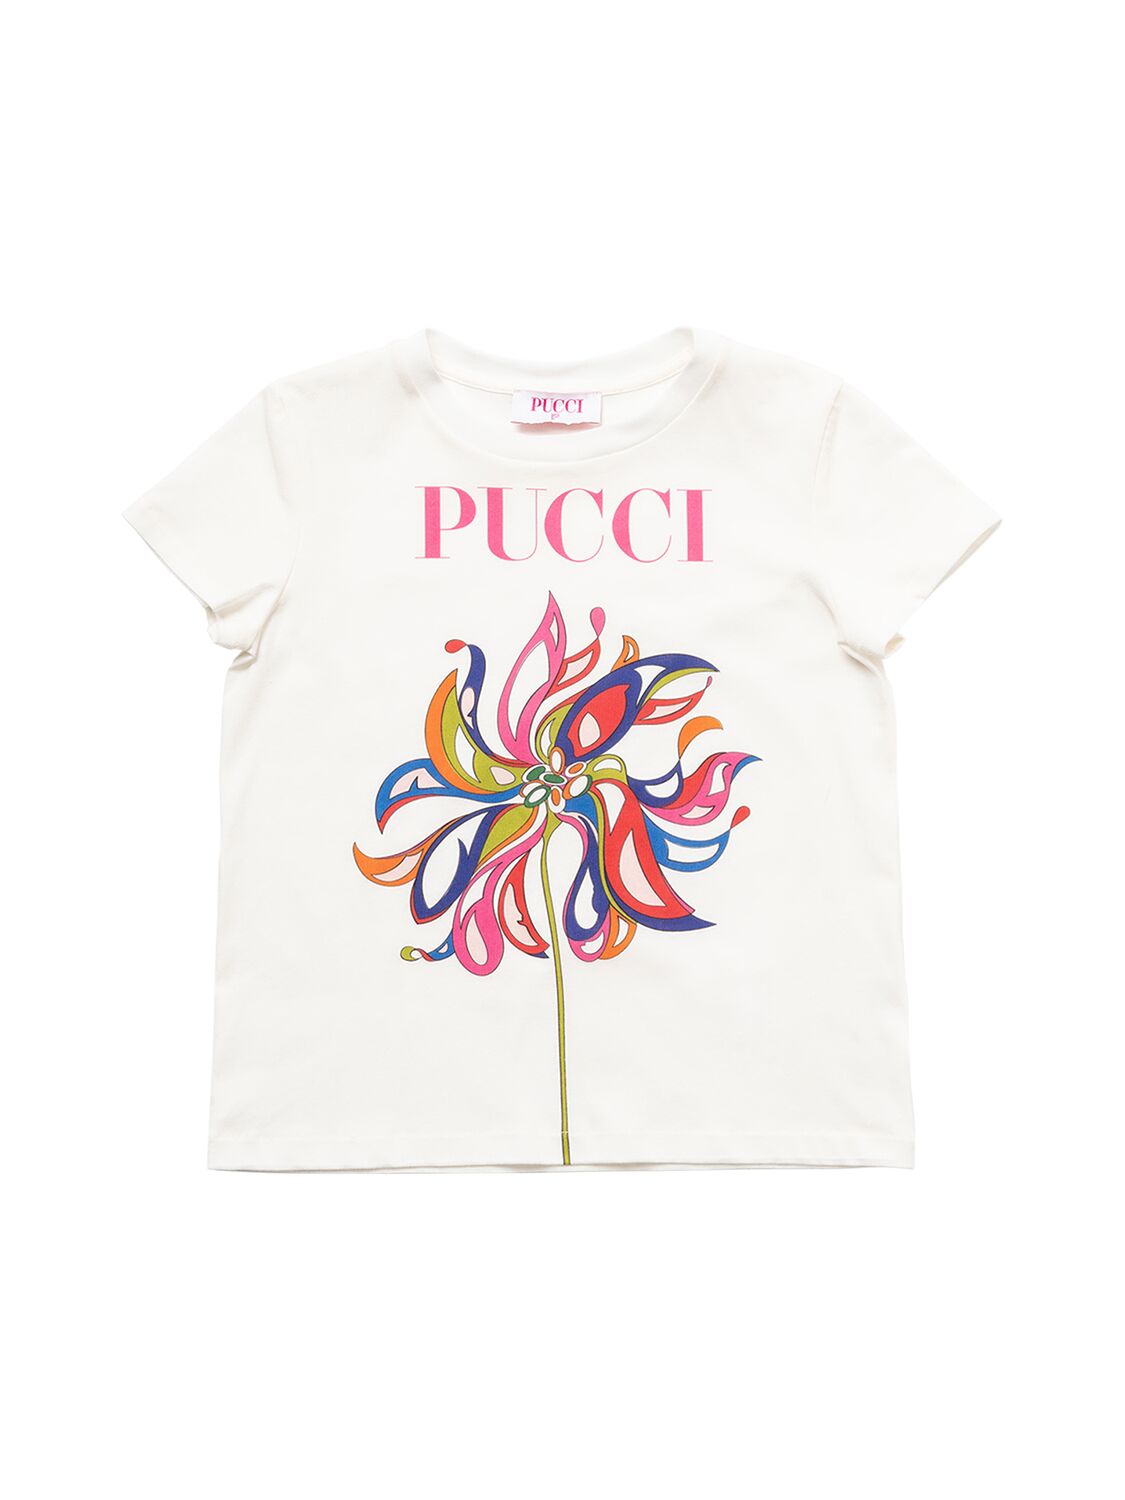 Pucci Kids' Printed Cotton Jersey T-shirt In Ivory